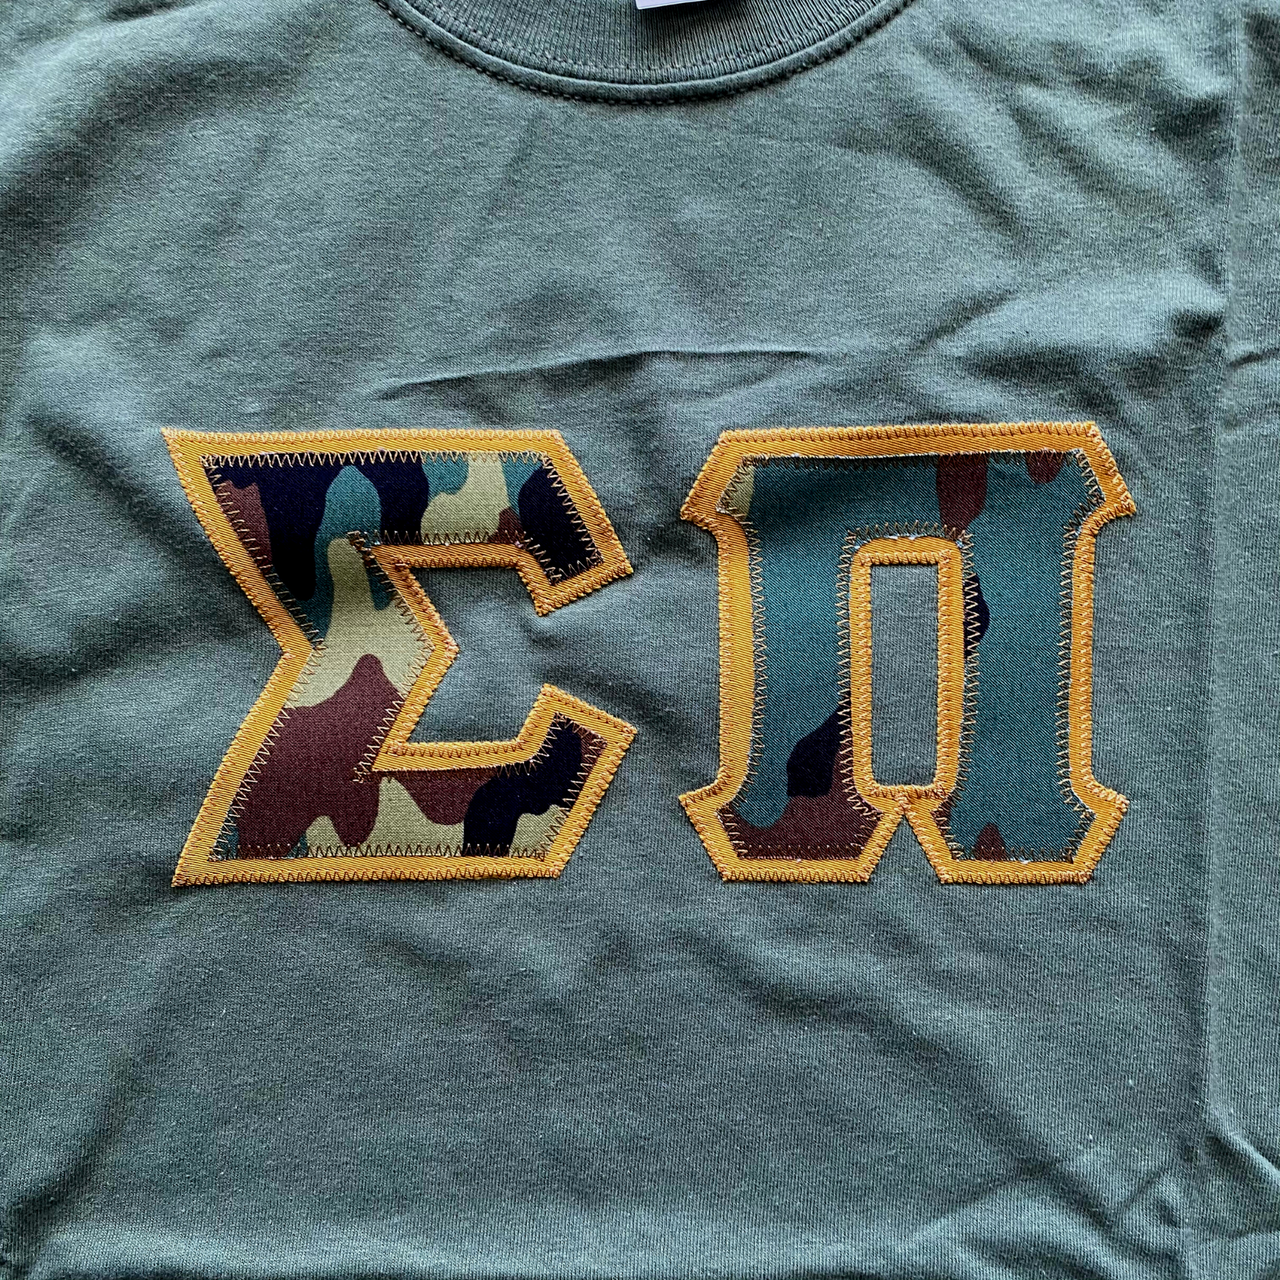 Sigma Pi Stitched Letter T-Shirt | Camo with a Tan Border